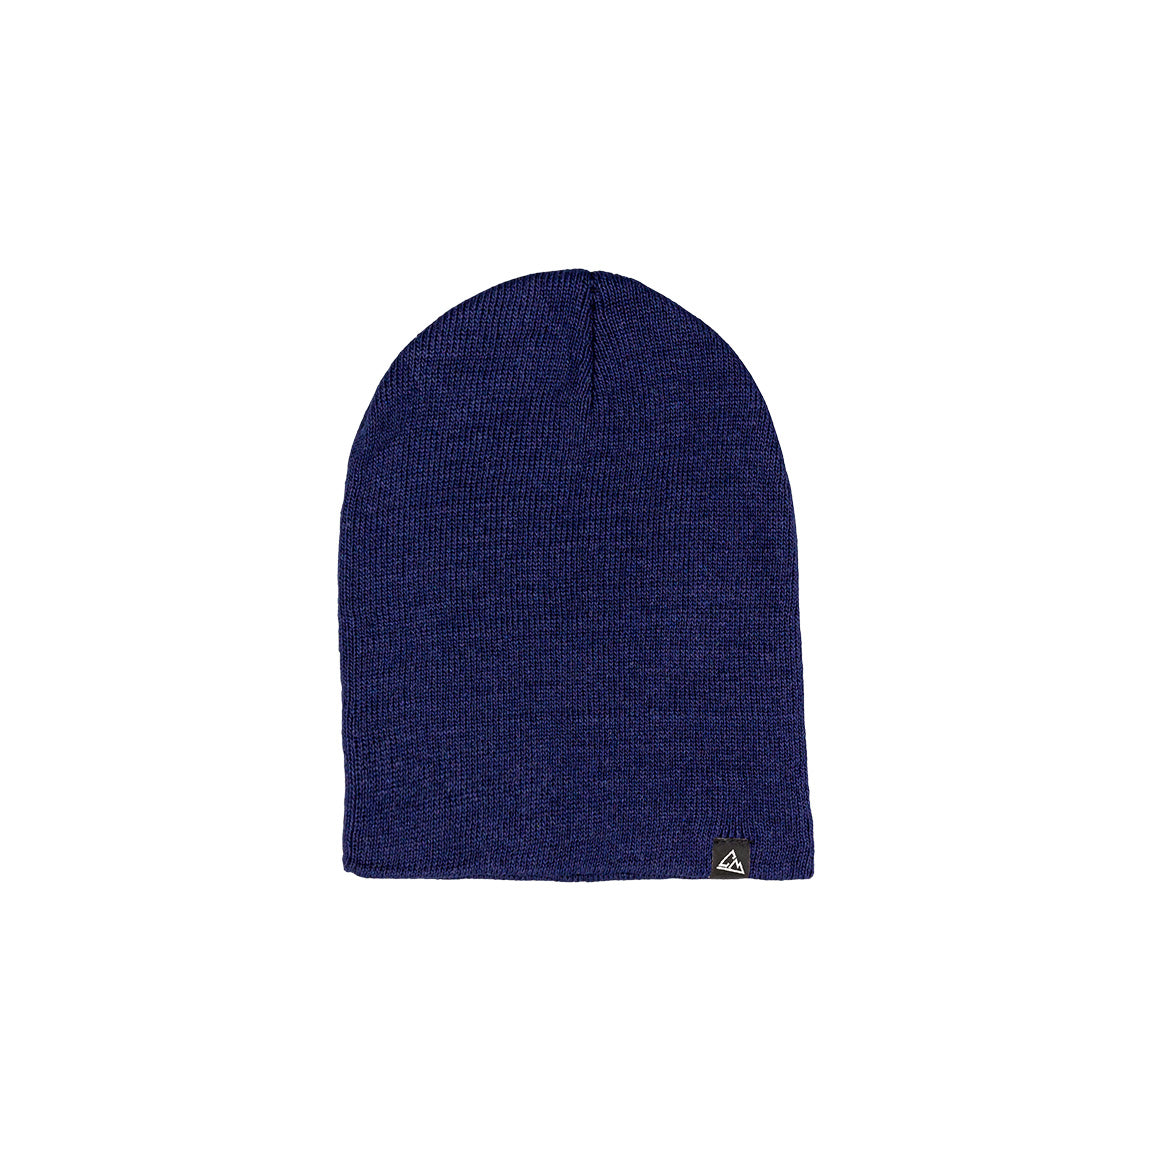 A plain navy blue beanie with a knitted design is displayed, complete with a small triangular logo near the base.